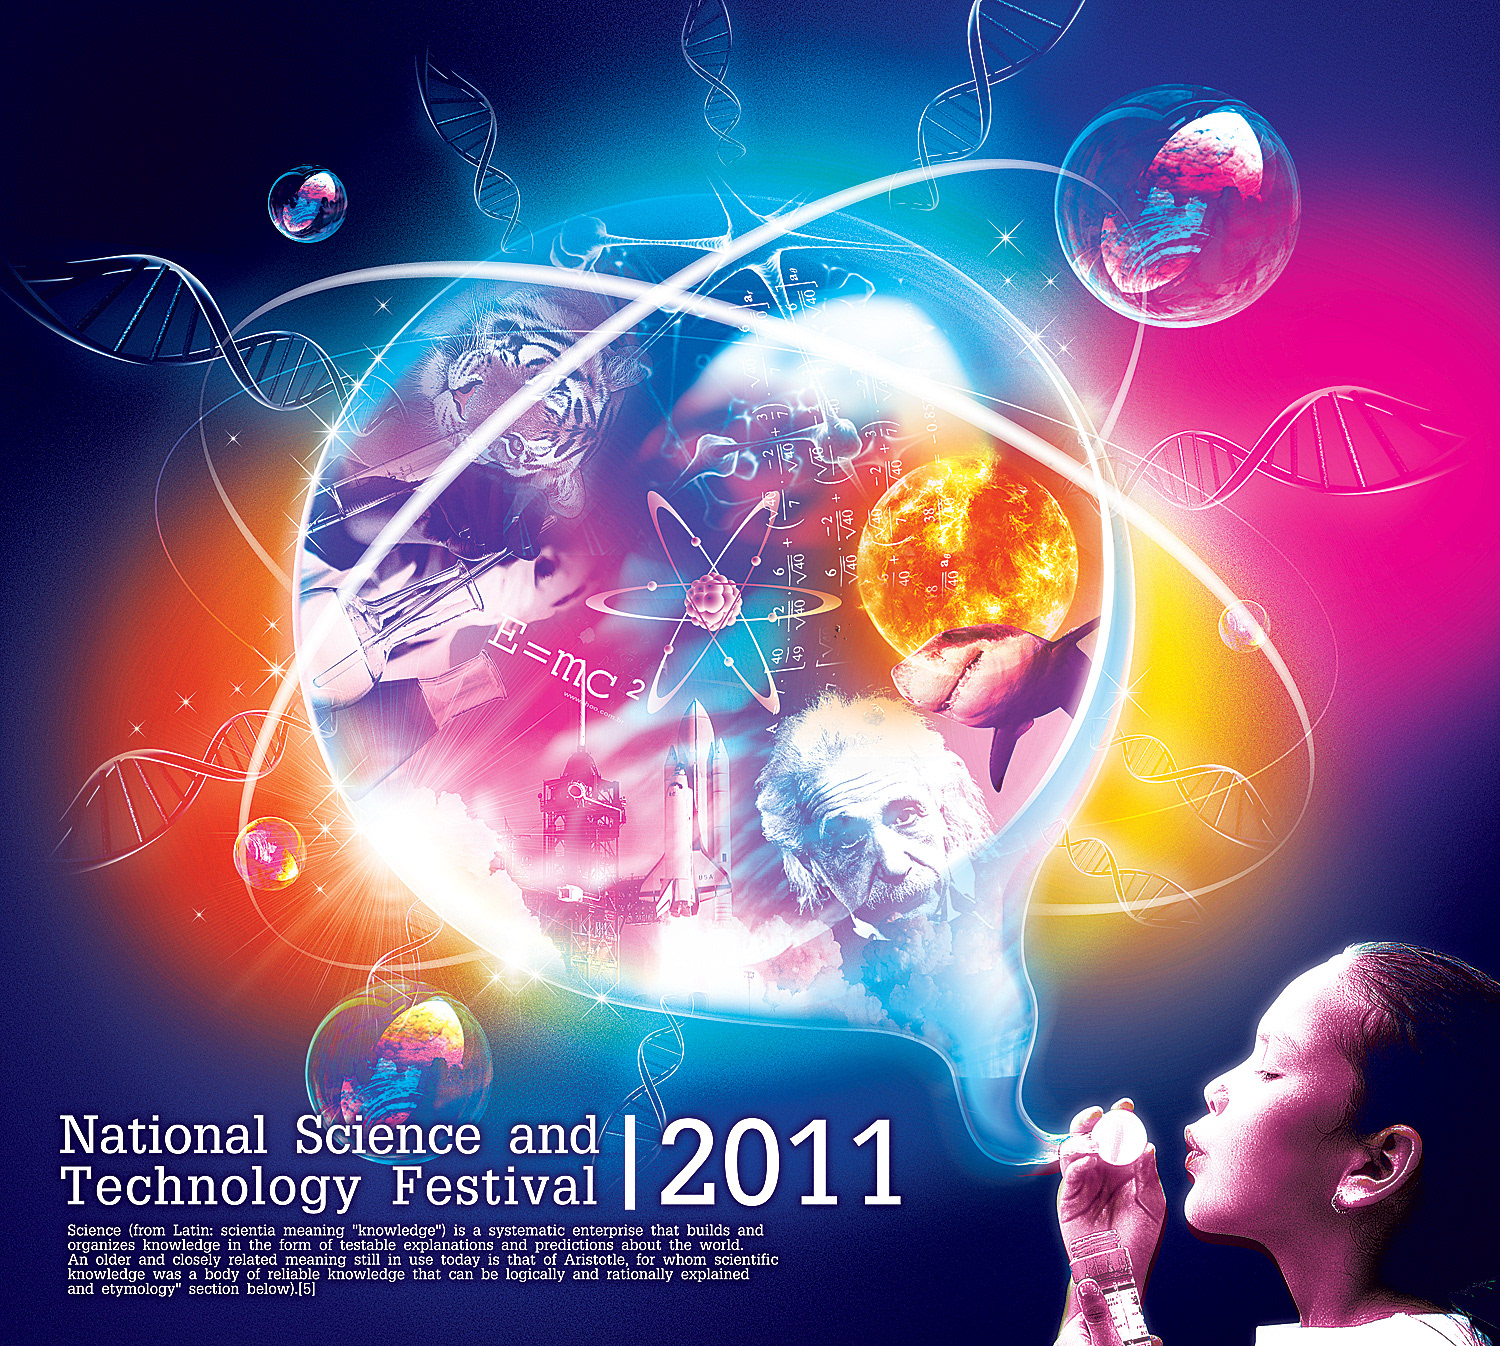 BryanVectorartist - Key Visual for National Science and Technology Festival